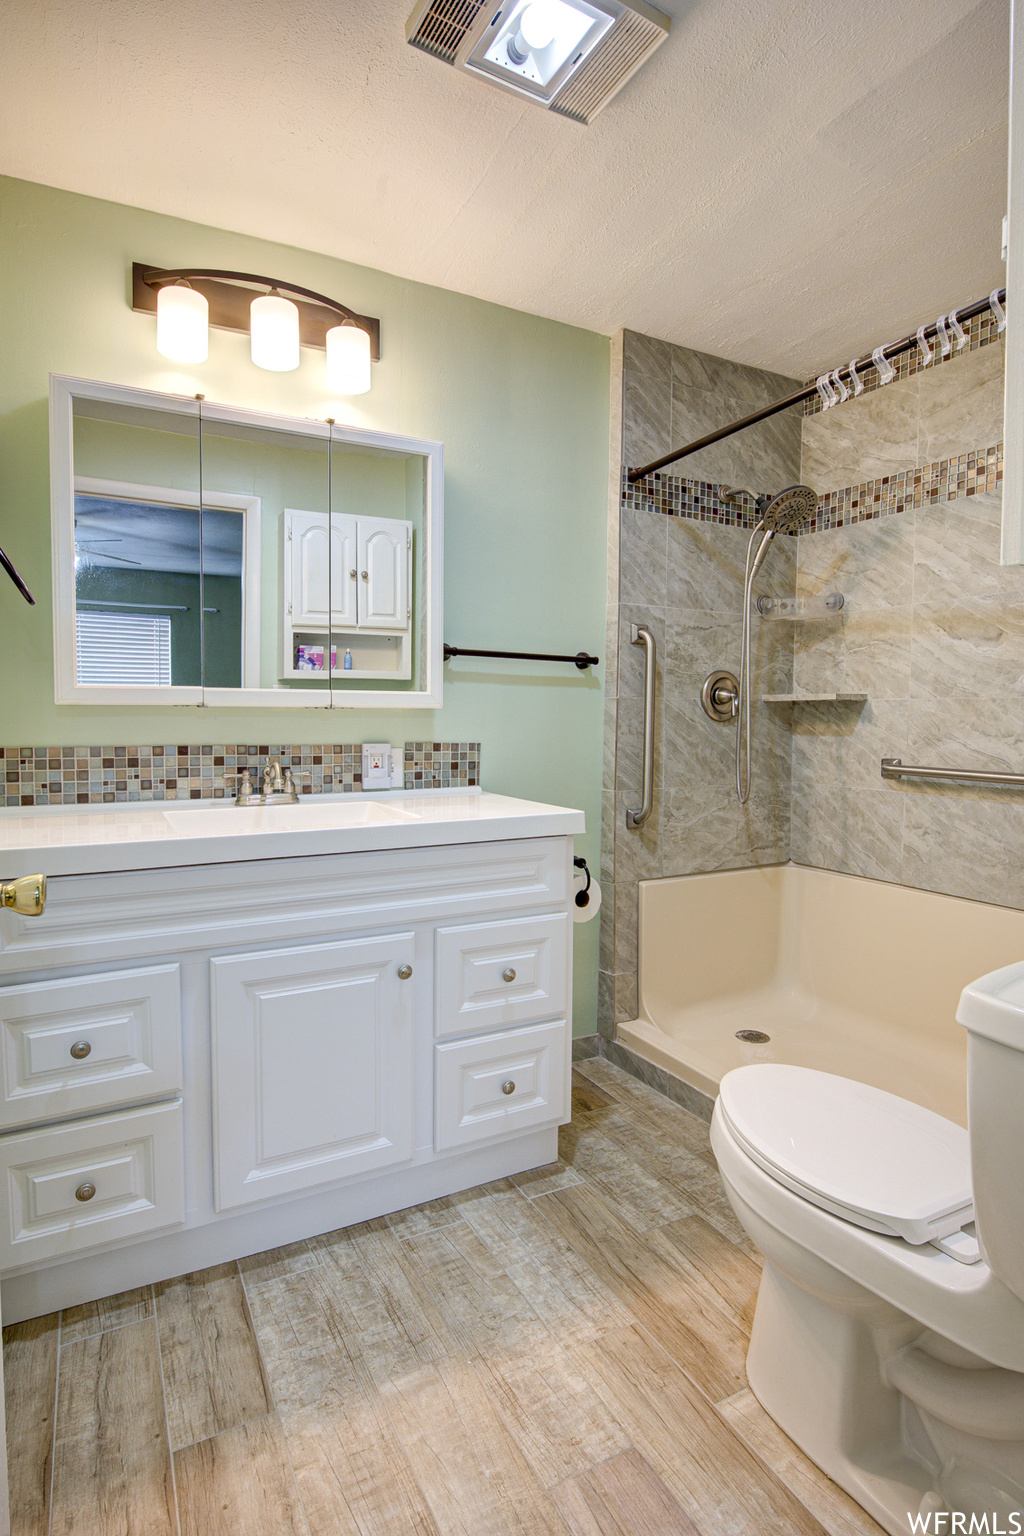 Bathroom featuring toilet, tiled shower, a textured ceiling, and oversized vanity